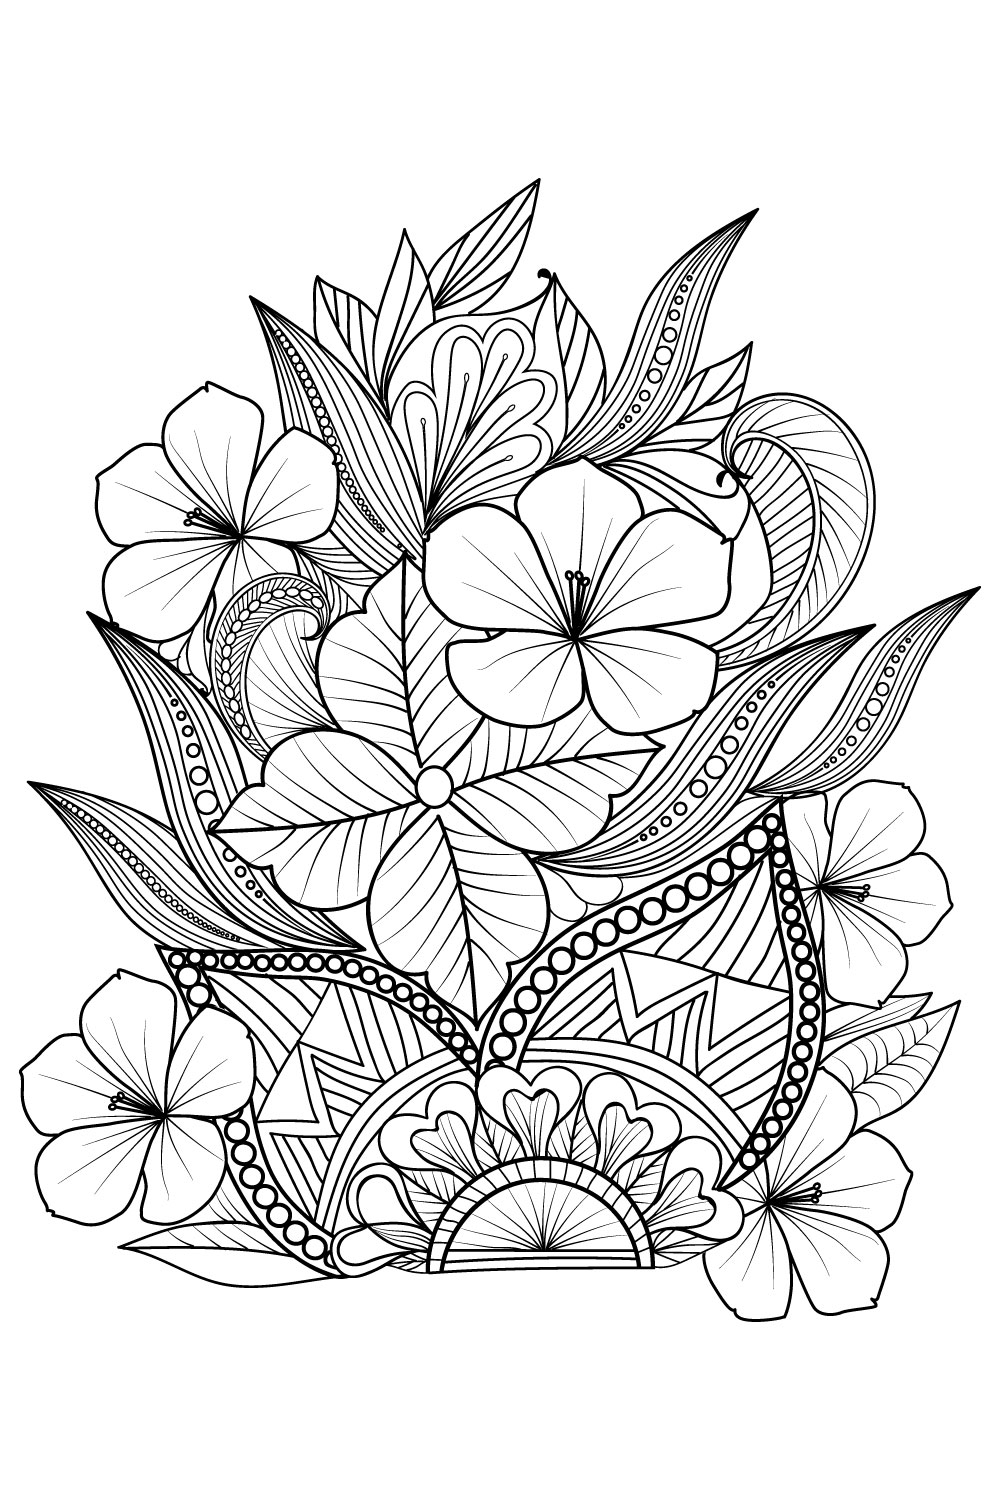 Doodle flower bouquet of line art, lovely design Easy sketch art of peony flower, line art bouquets of floral hand drawn illustration, doodle zentangle, tattooing drawing coloring page, and book isolated image clip art botanic collection, vector art pinterest preview image.